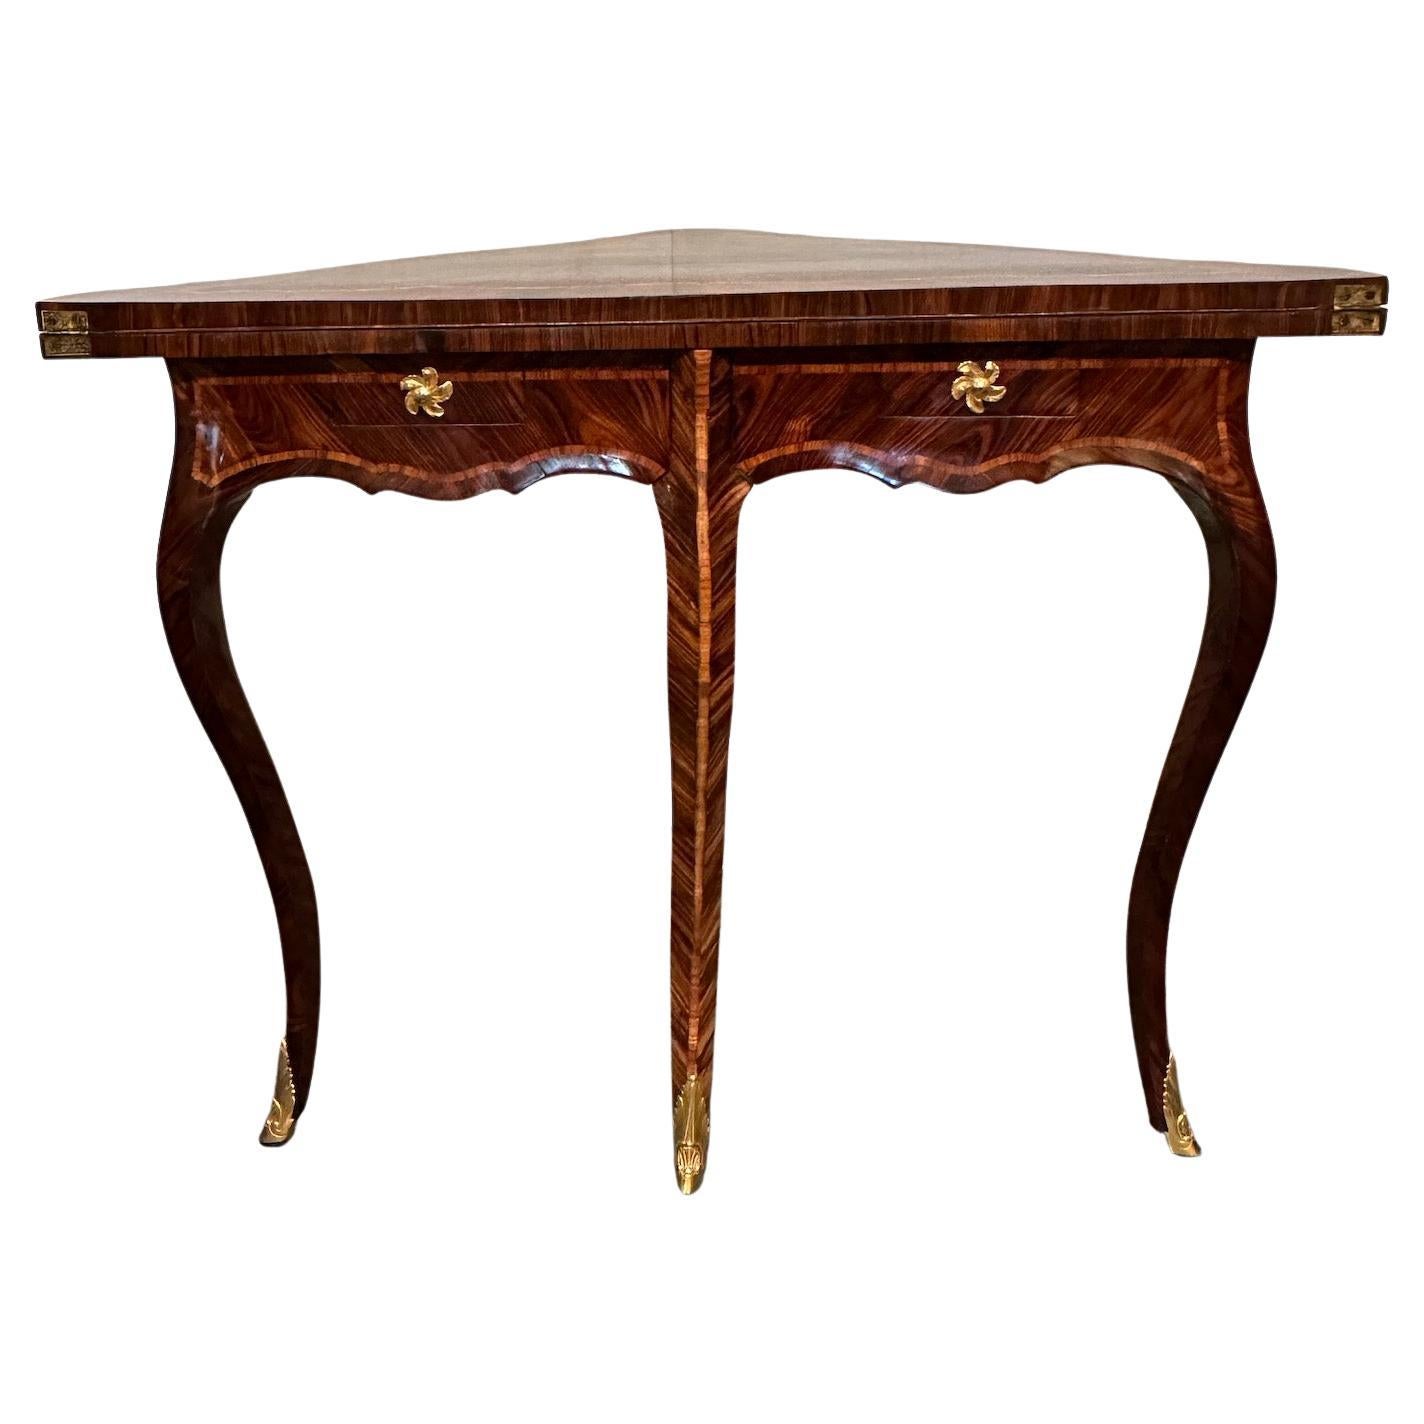 An elegant and beautiful Louis XV style burled mahogany and kingwood veneer corner games table.  Gilded bronze knobs and sabots.  2 drawers.  Top opens to  30